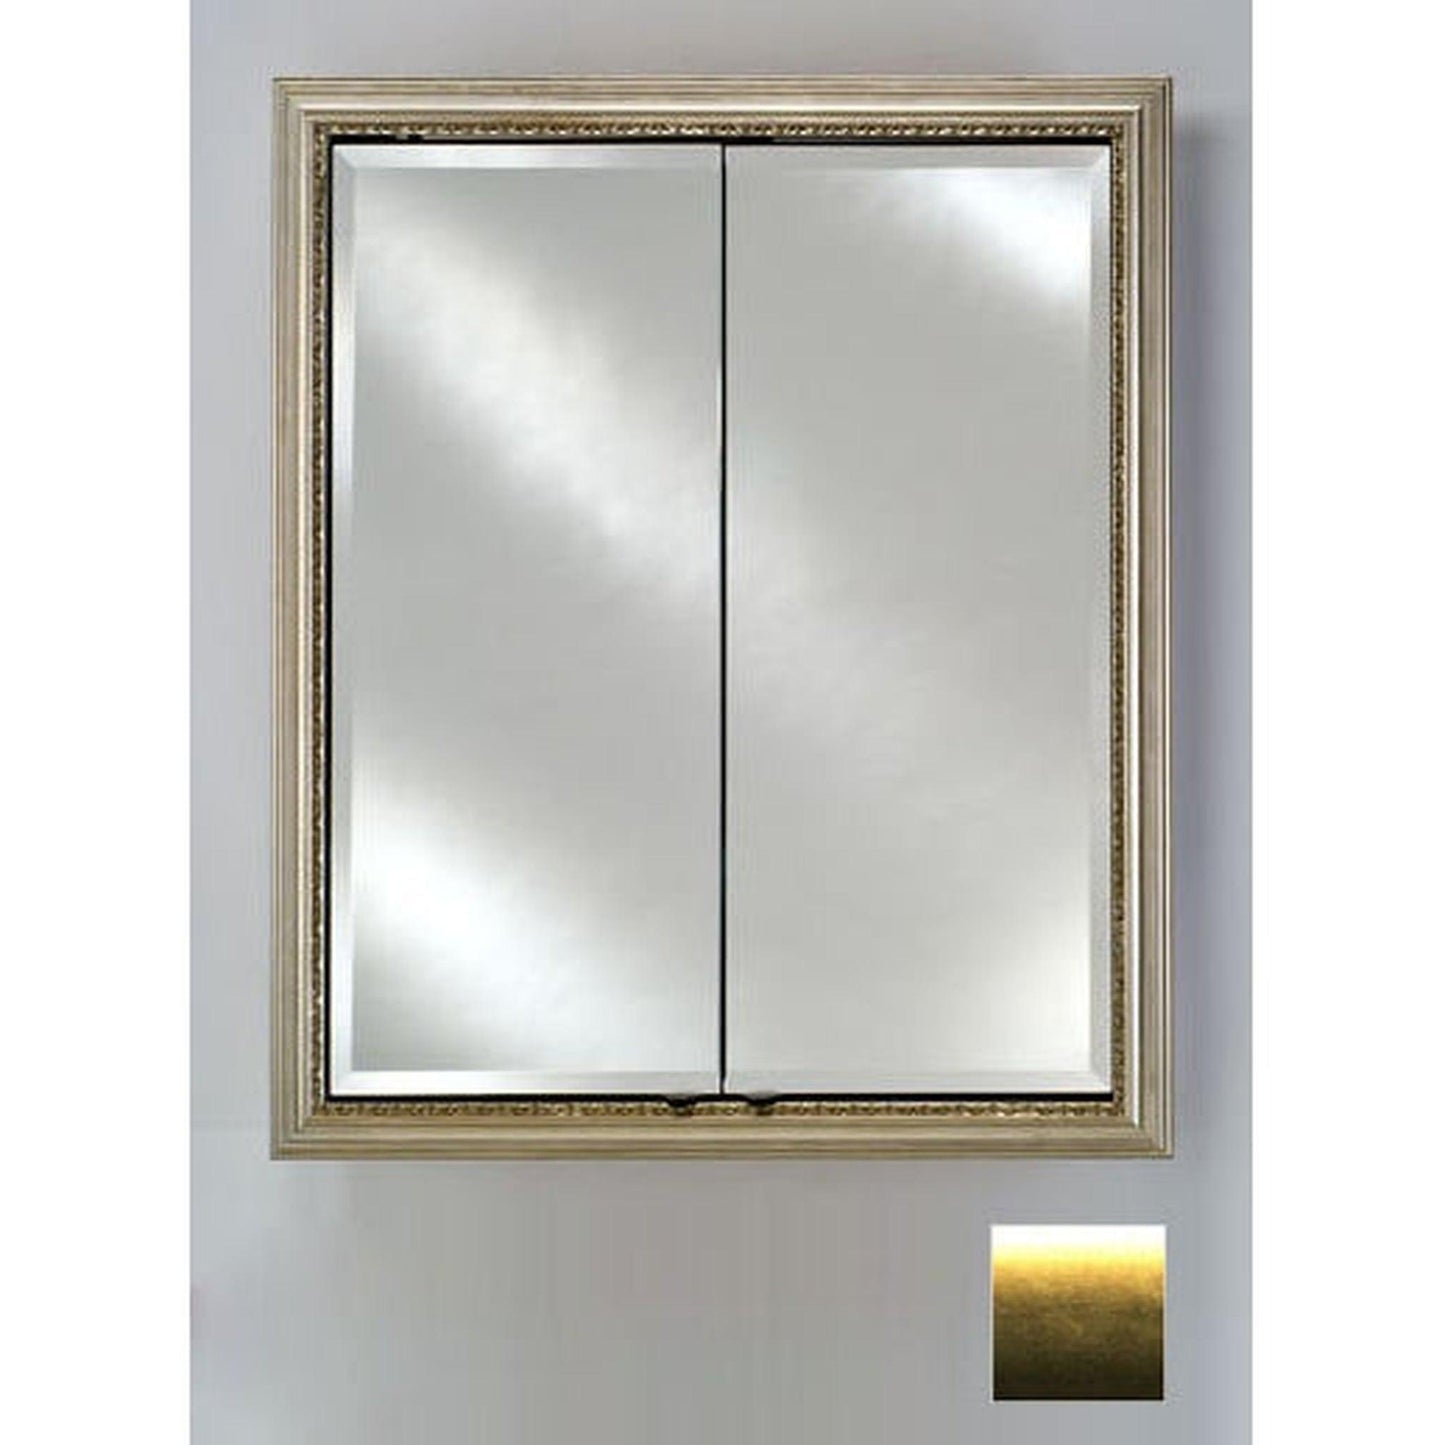 Afina Signature 24" x 30" Brushed Satin Gold Recessed Double Door Medicine Cabinet With Beveled Edge Mirror